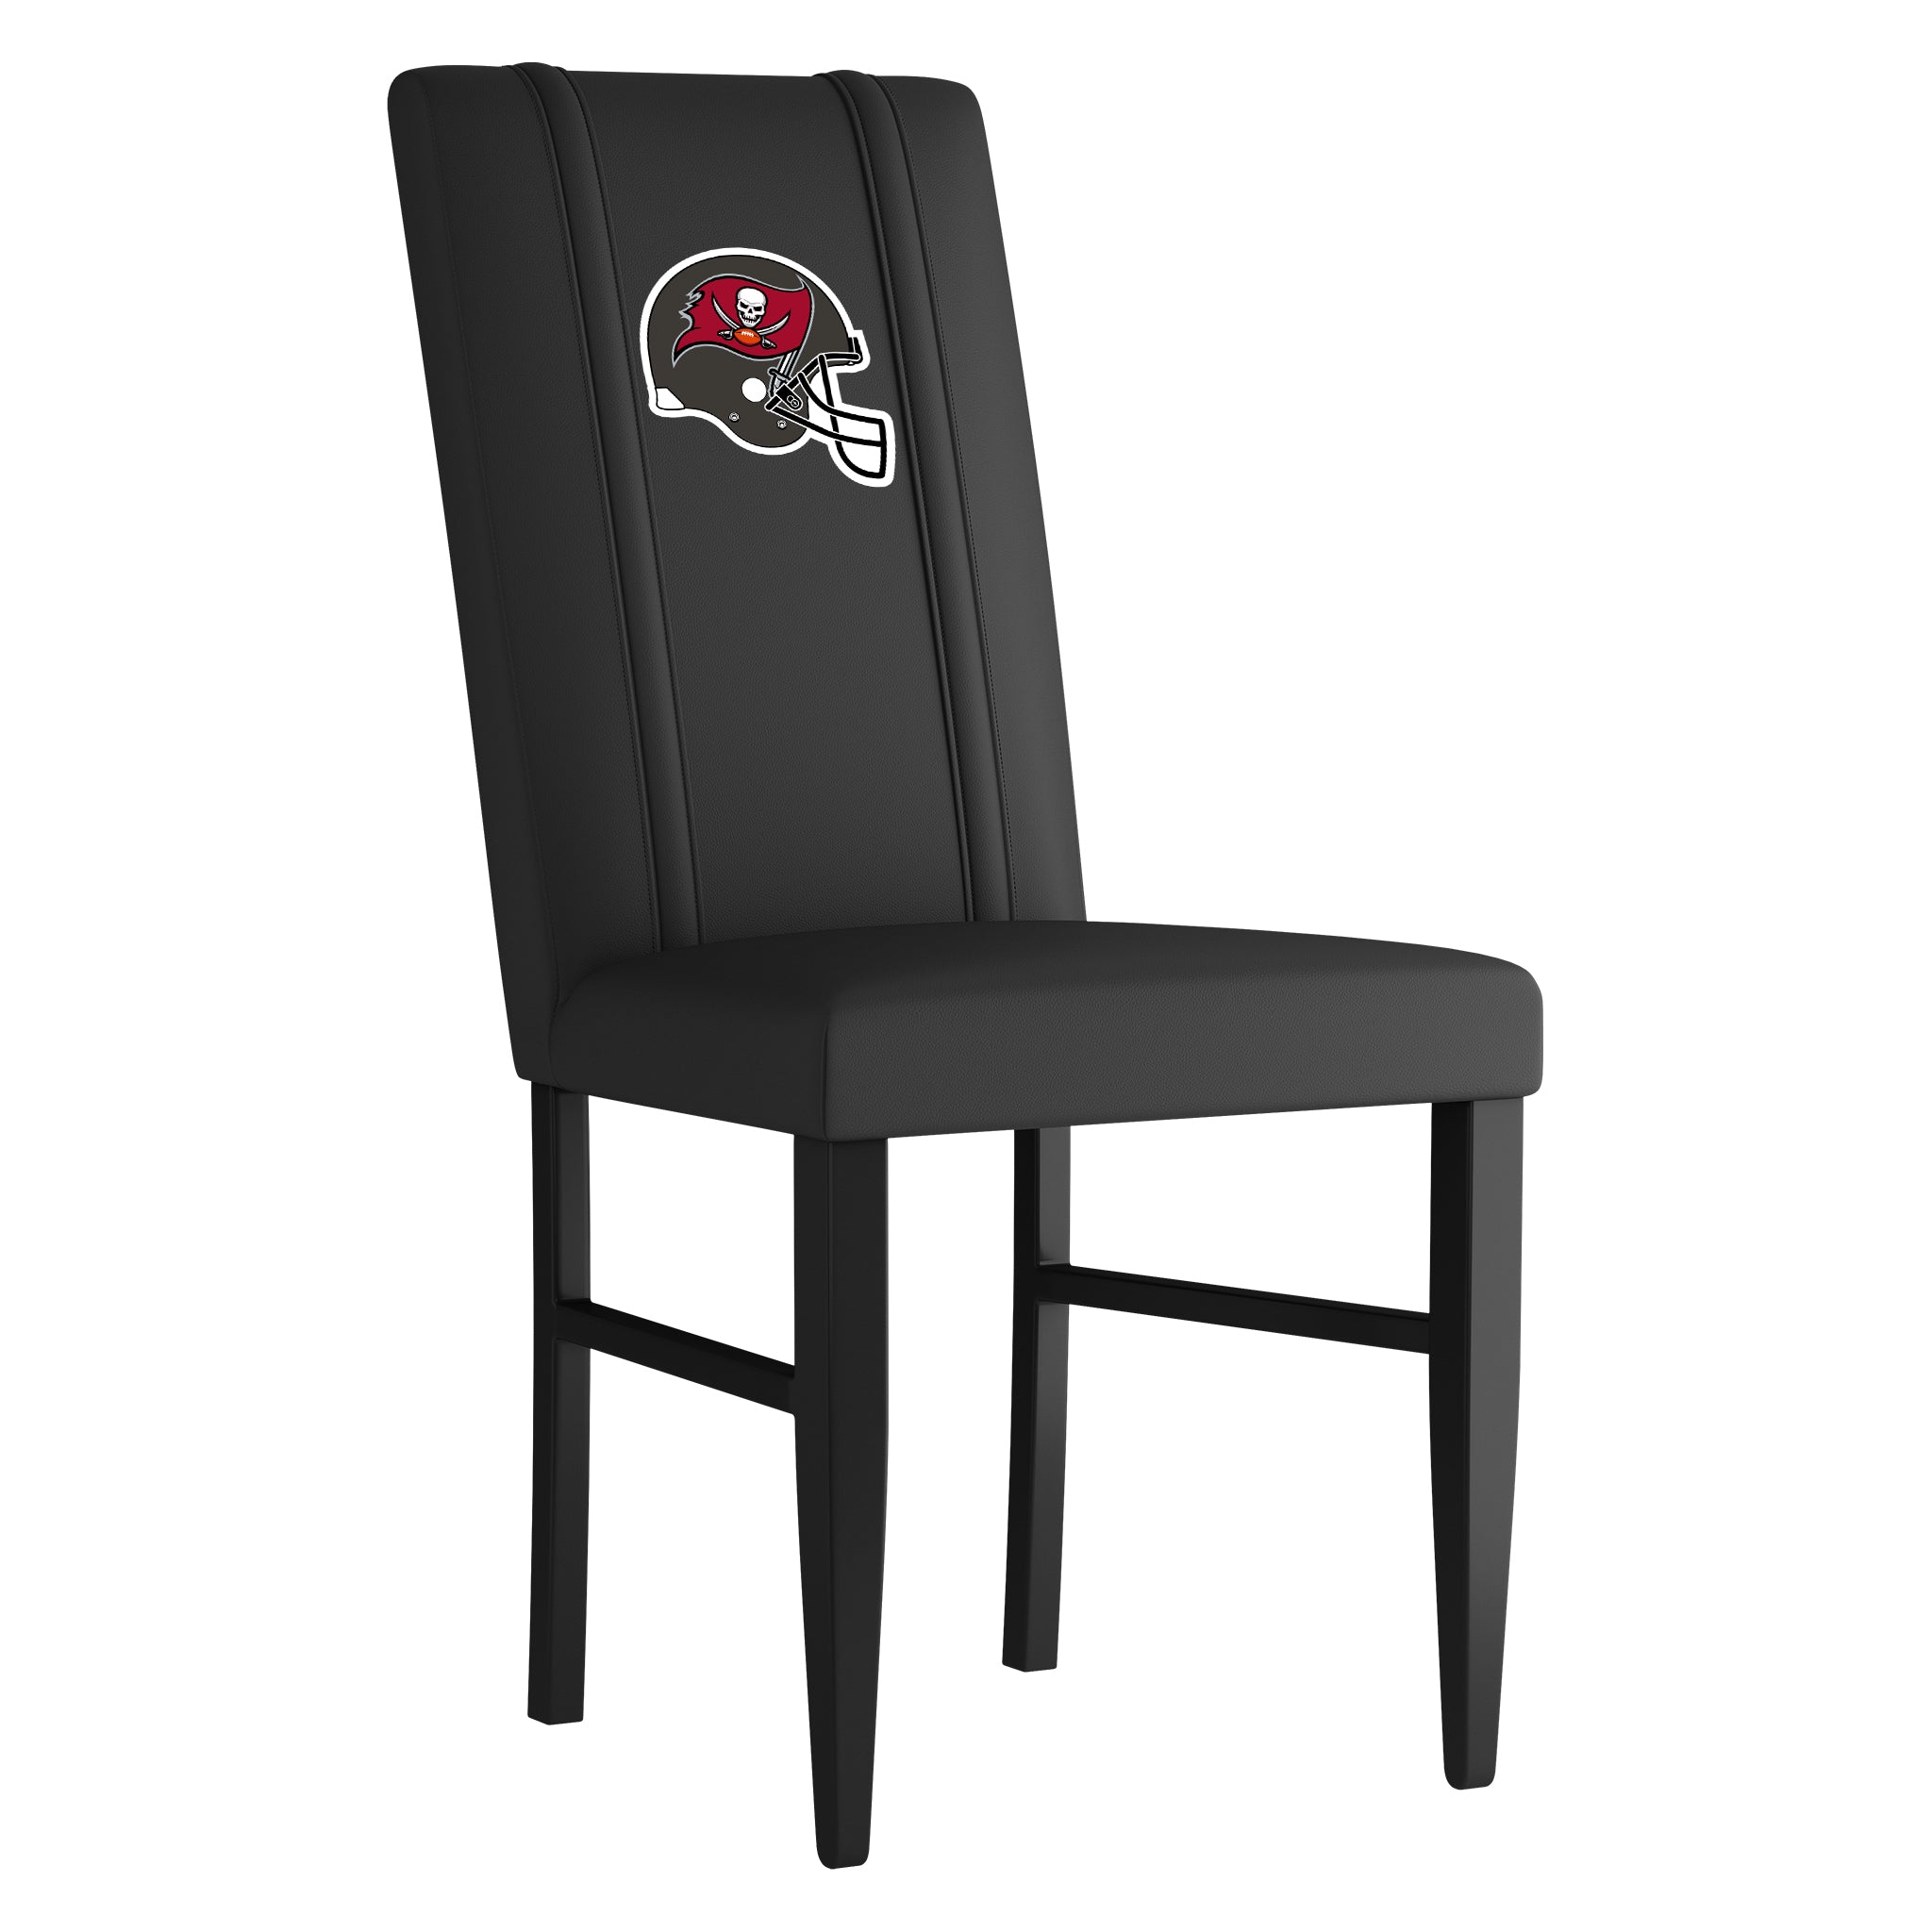 Tampa Bay Buccaneers Side Chair 2000